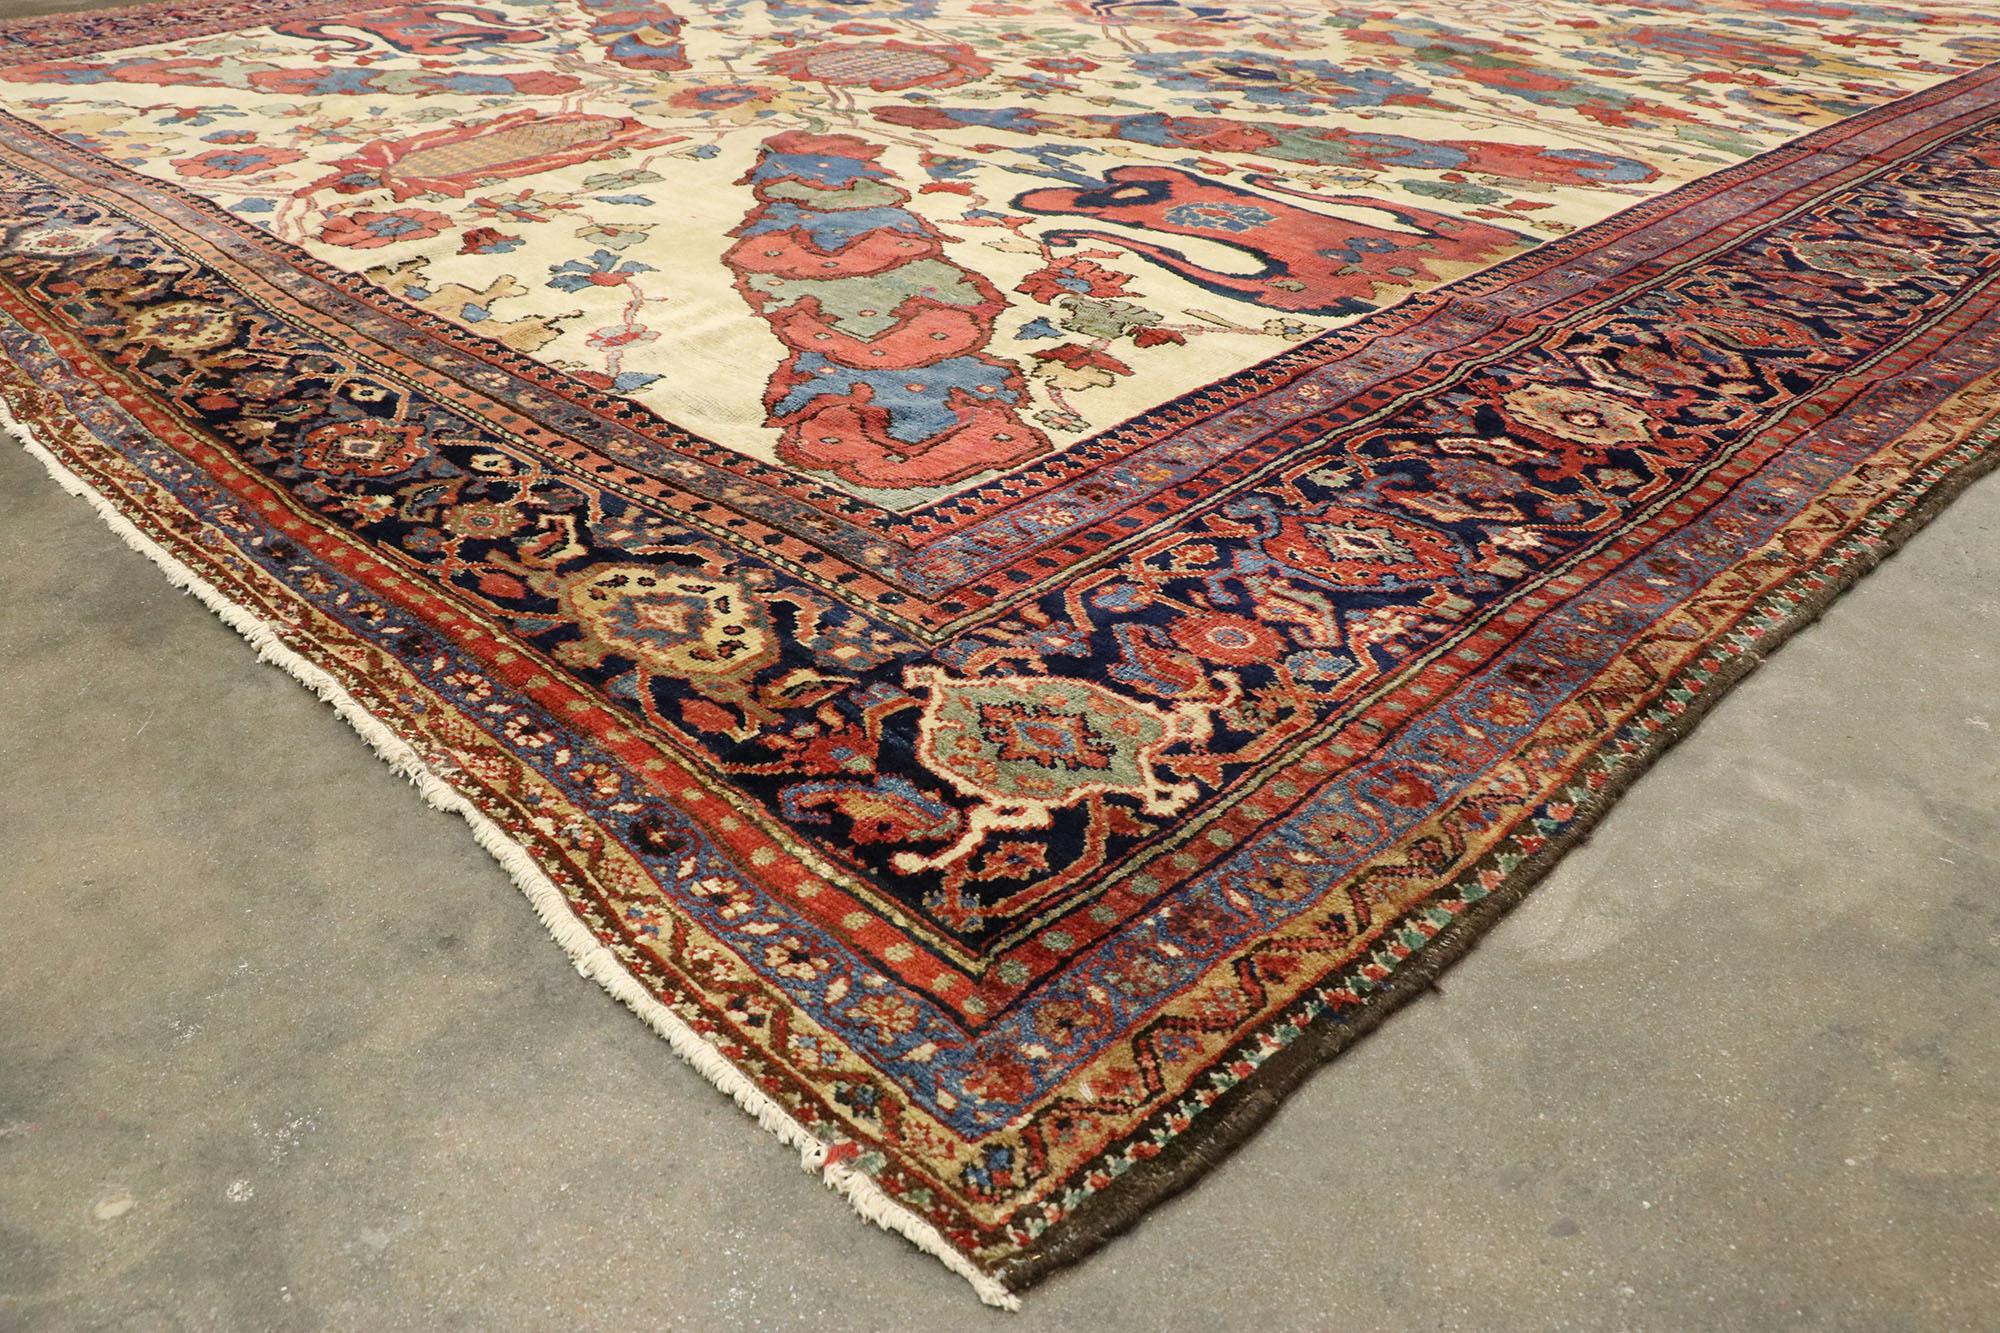 19th Century 1880s Antique Persian Ziegler Mahal Sultanabad Rug, Hotel Lobby Size Carpet For Sale